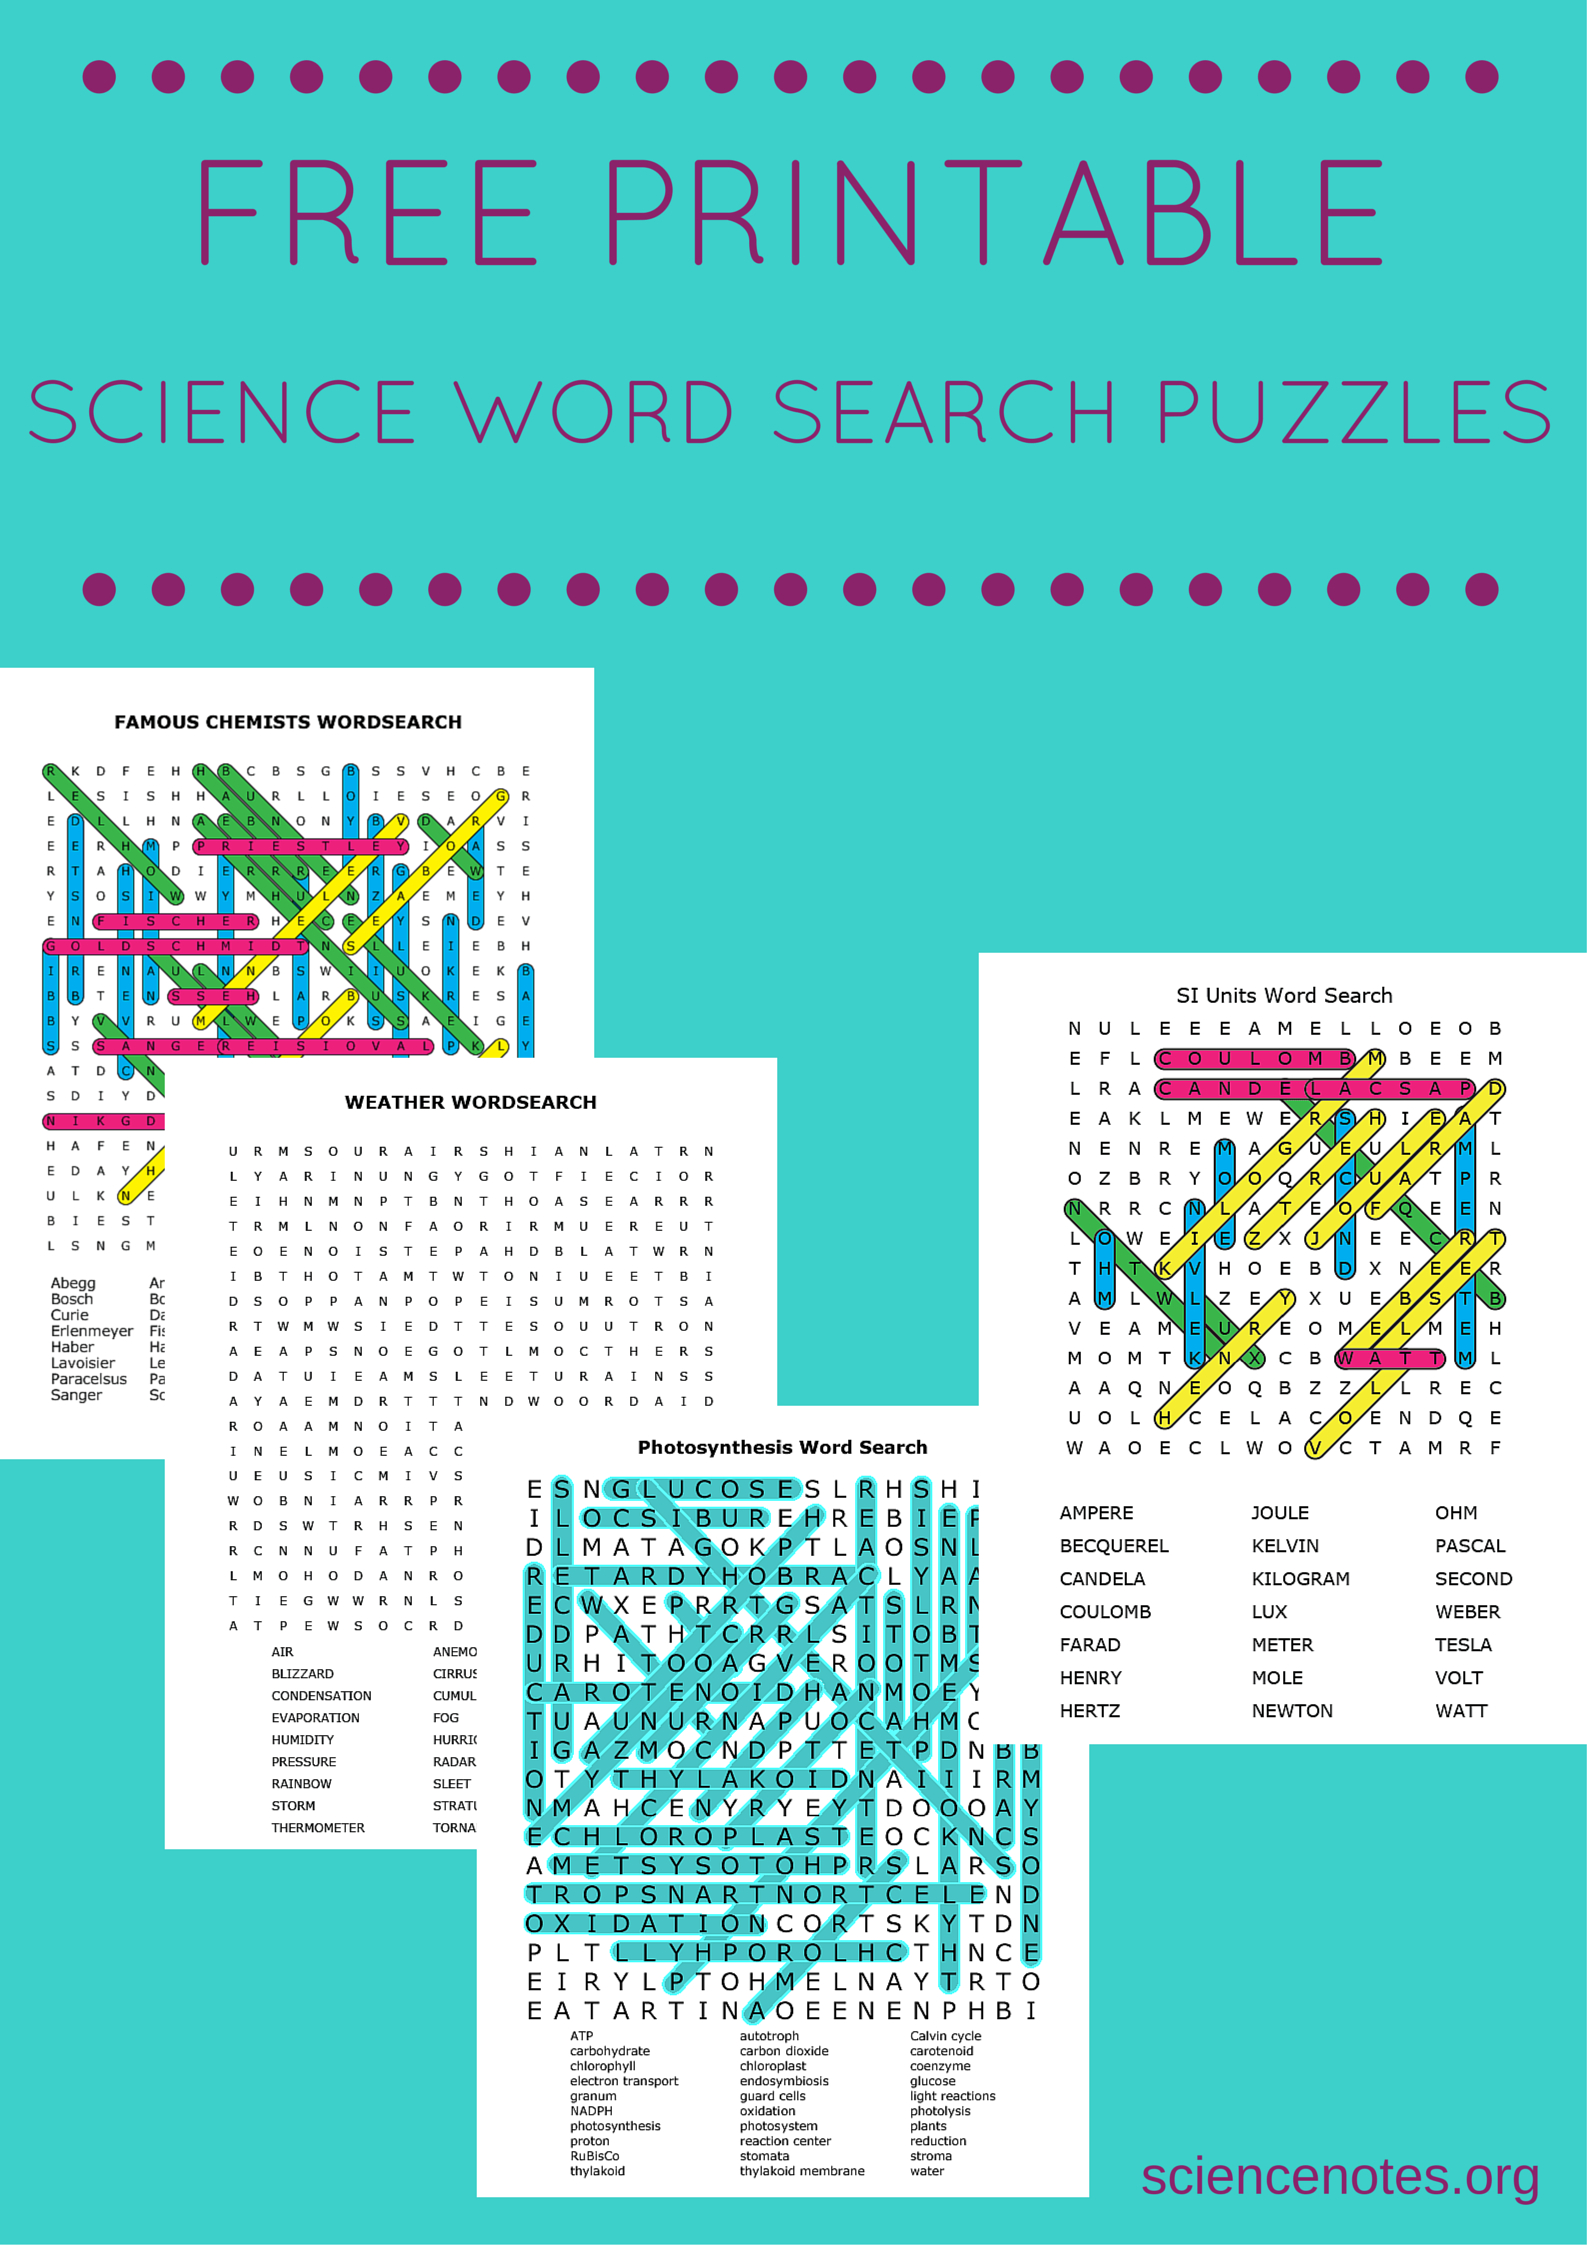 Free Printable Science Word Search Puzzles - Printable Science Puzzle